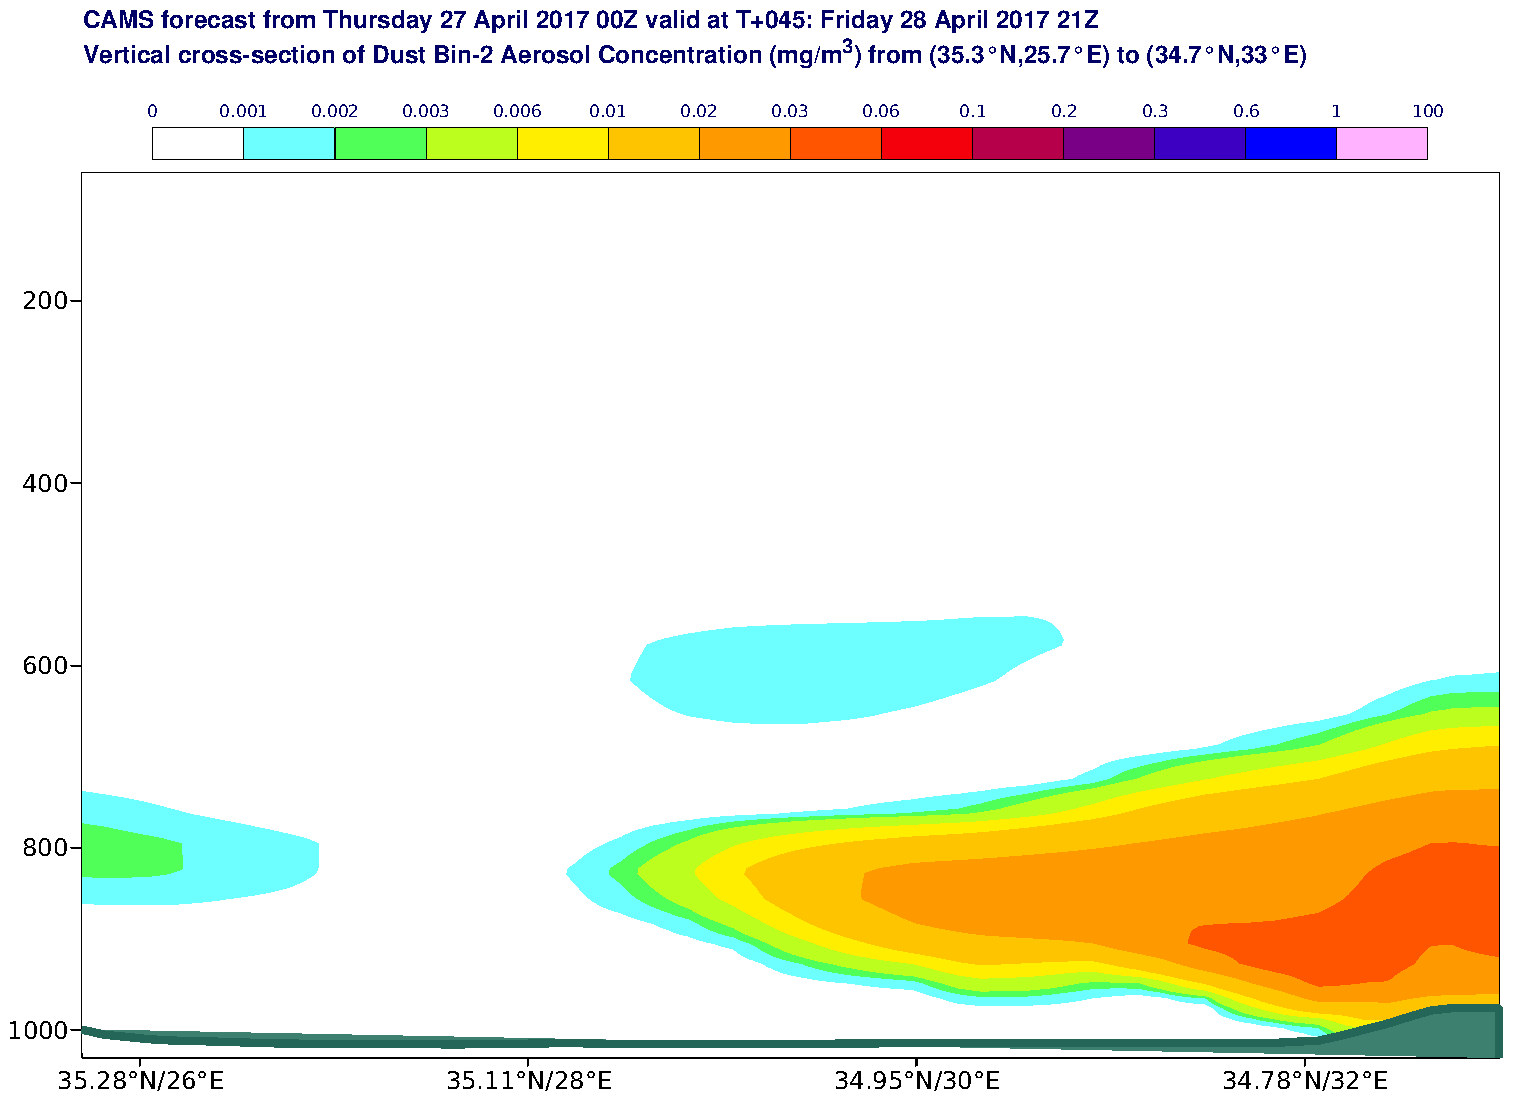 Vertical cross-section of Dust Bin-2 Aerosol Concentration (mg/m3) valid at T45 - 2017-04-28 21:00